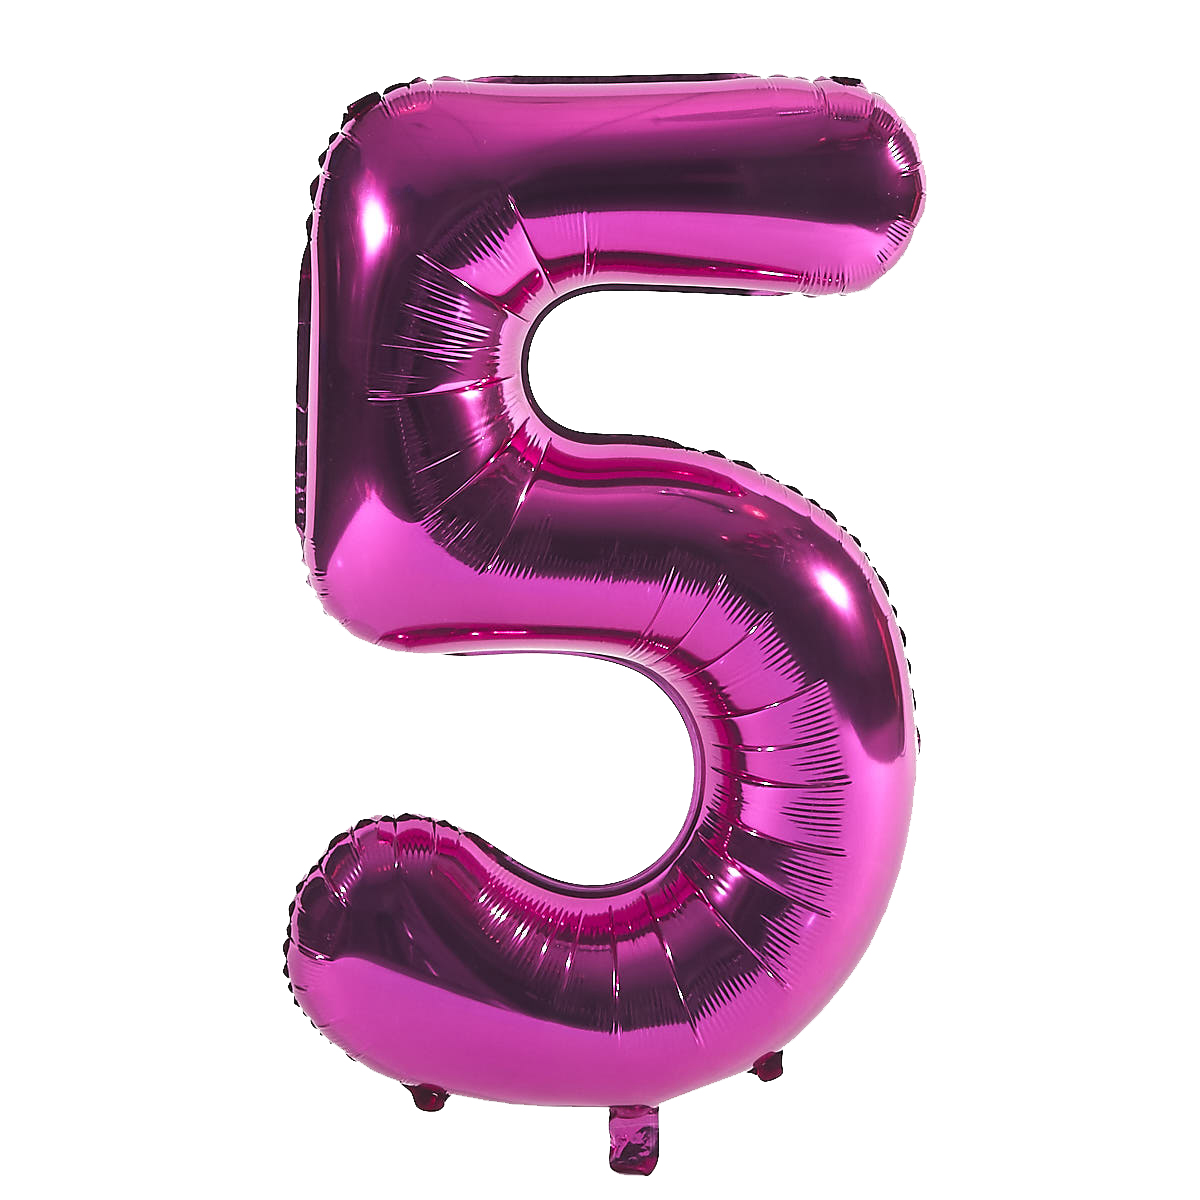 Age 50 Giant Foil Helium Numeral Balloons - Pink (deflated)